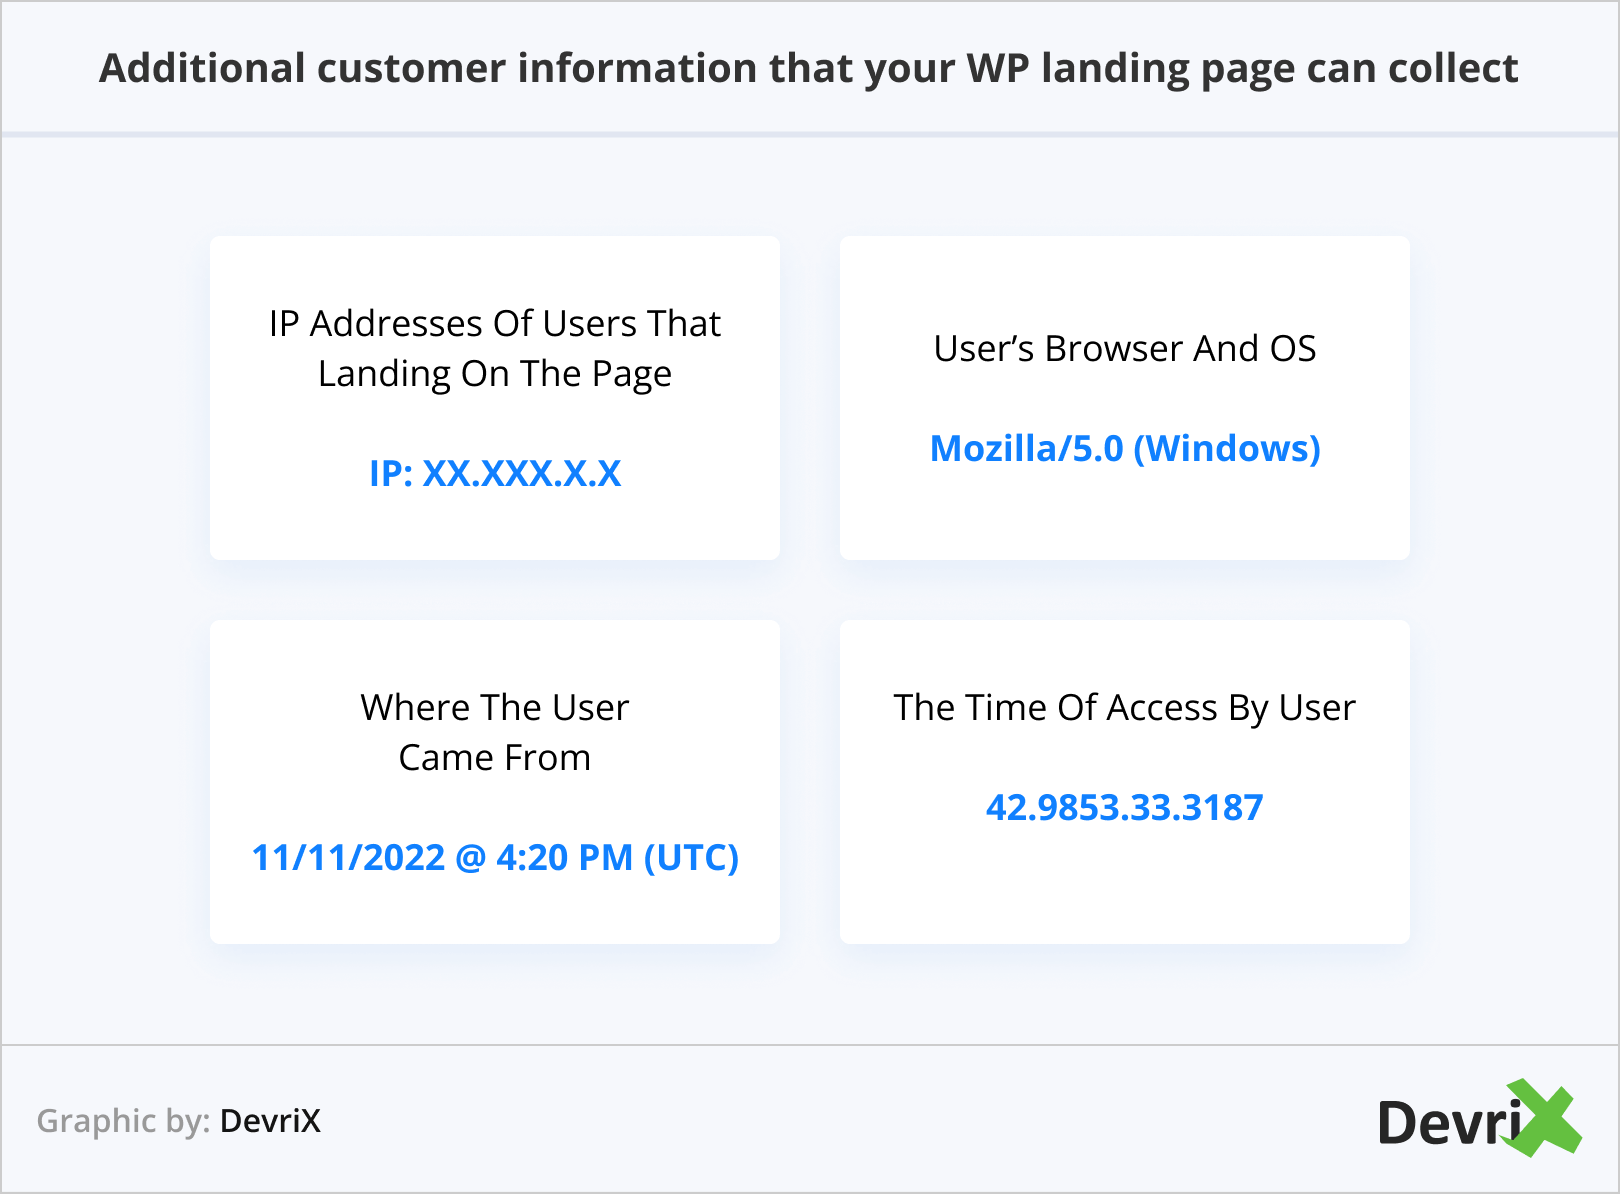 Additional customer information that your WP landing page can collect